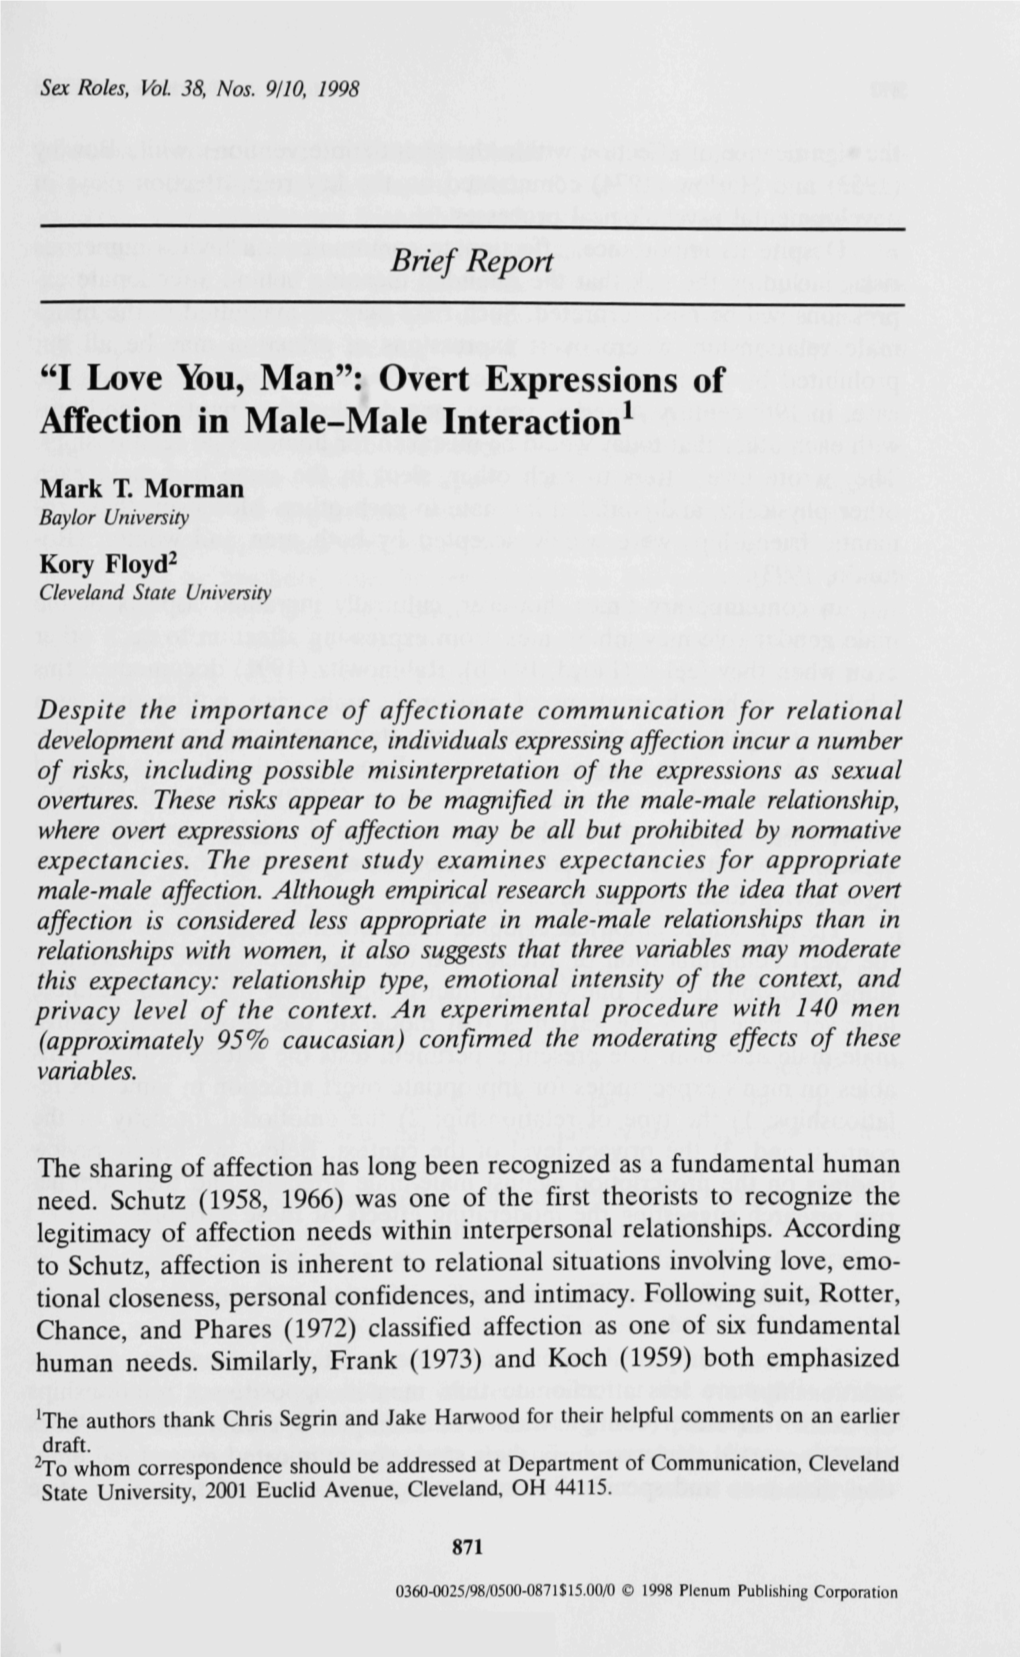 "I Love You, Man": Overt Expressions of Affection in Male-Male Interaction^